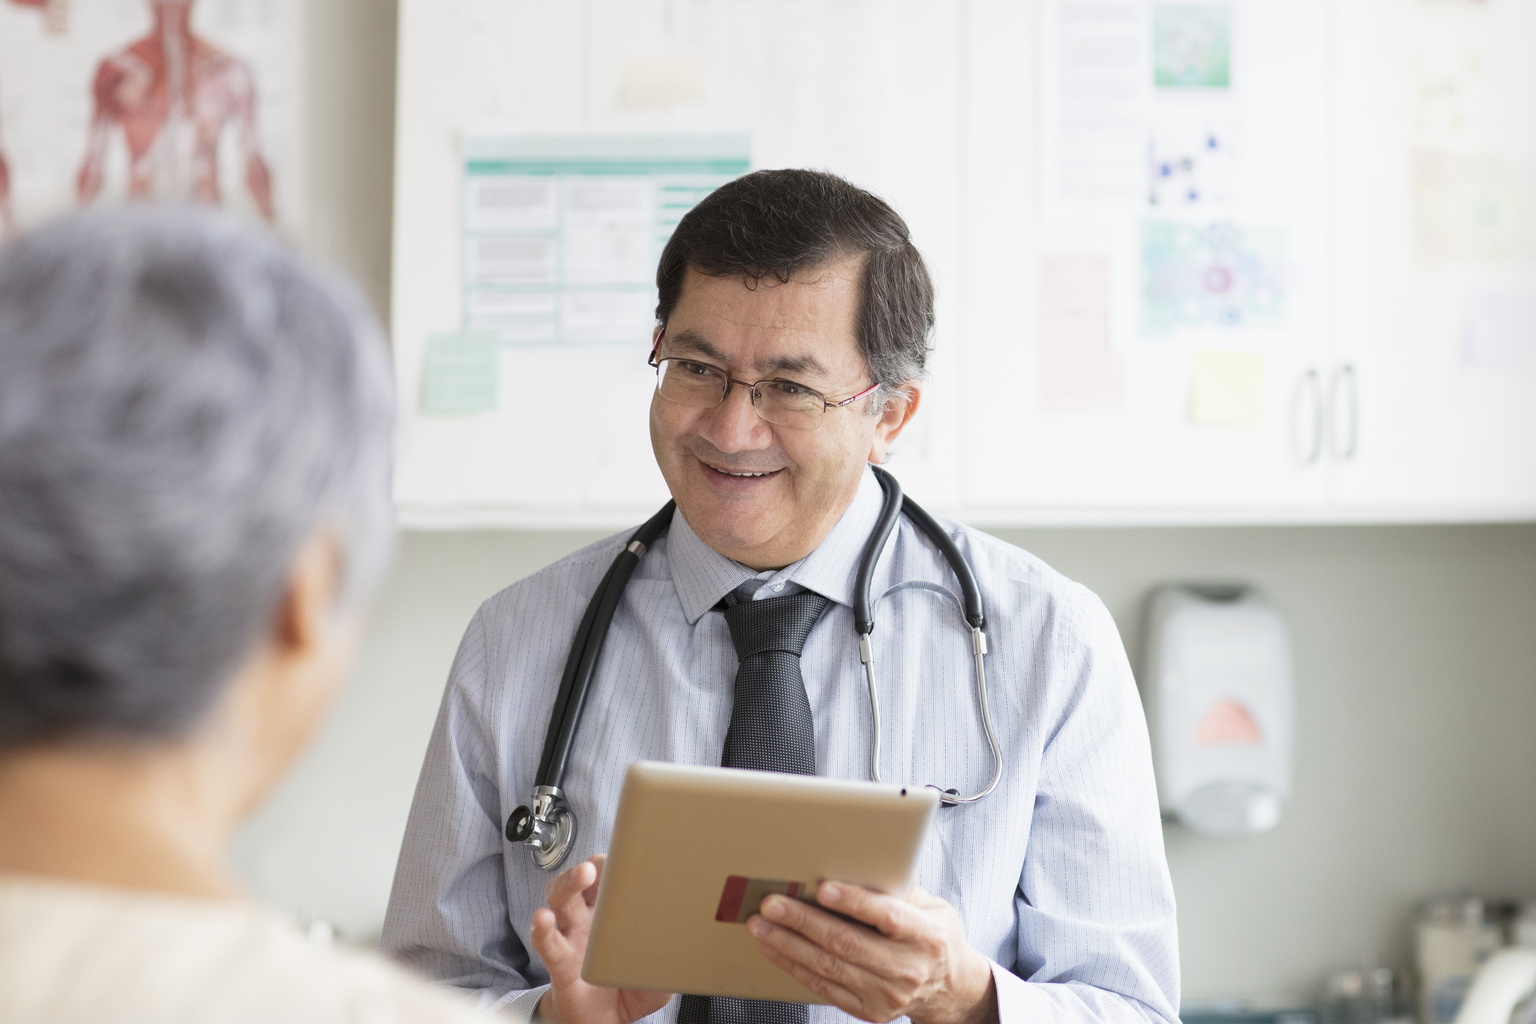 Hispanic male doctor with digital tablet talking to patient.